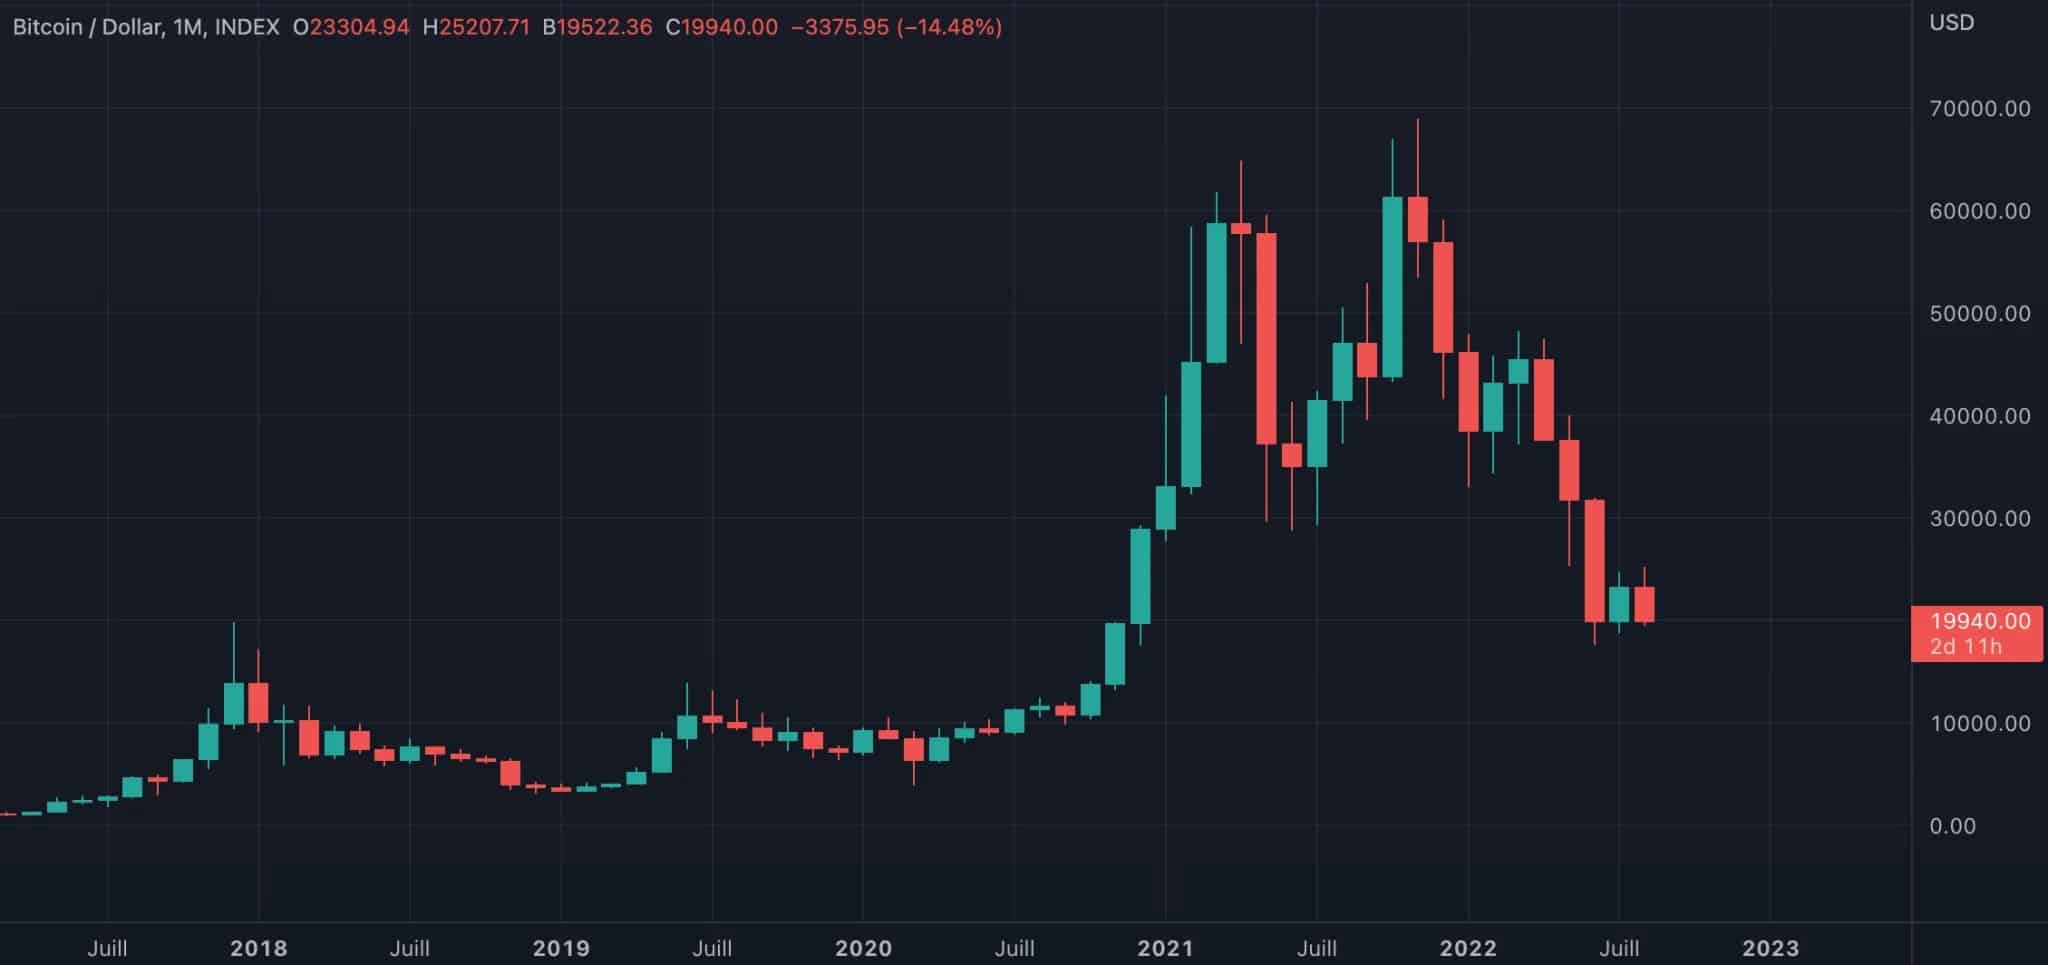 Bitcoin (BTC) price in monthly time scale